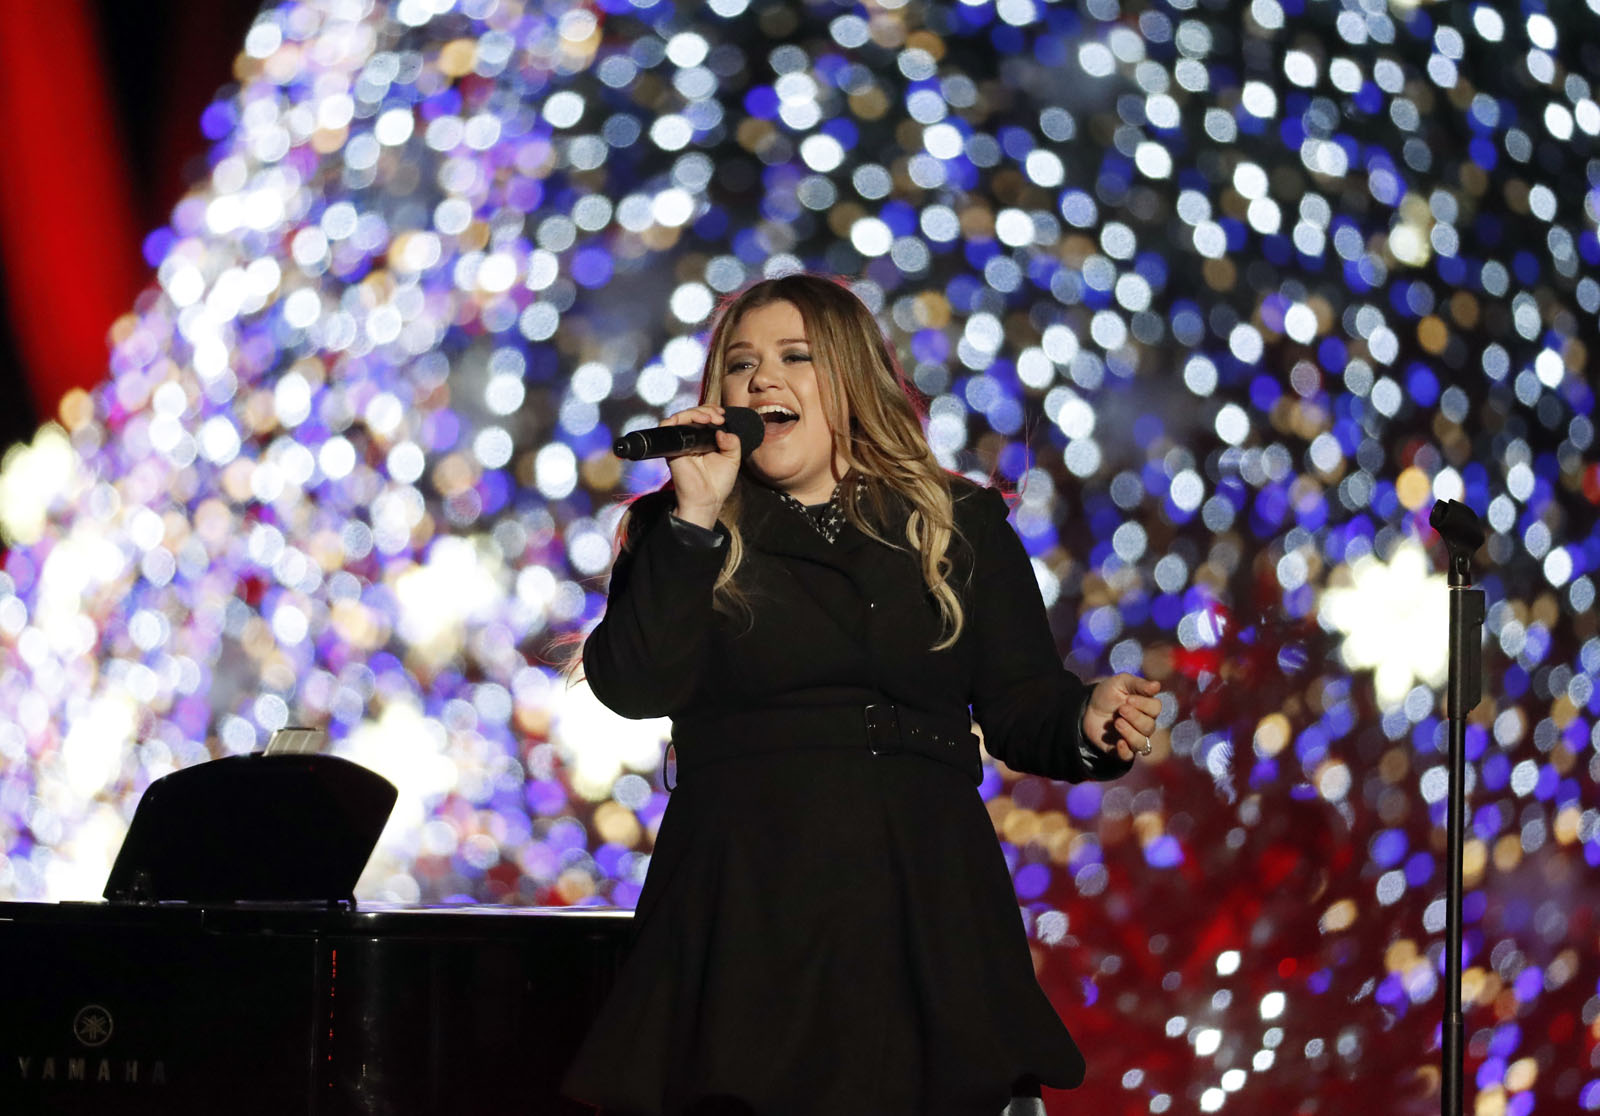 Singer Kelly Clarkson performs during the lighting ceremony for the 2016 National Christmas Tree on the Ellipse near the White House, Thursday, Dec. 1, 2016 in Washington. (AP Photo/Alex Brandon)